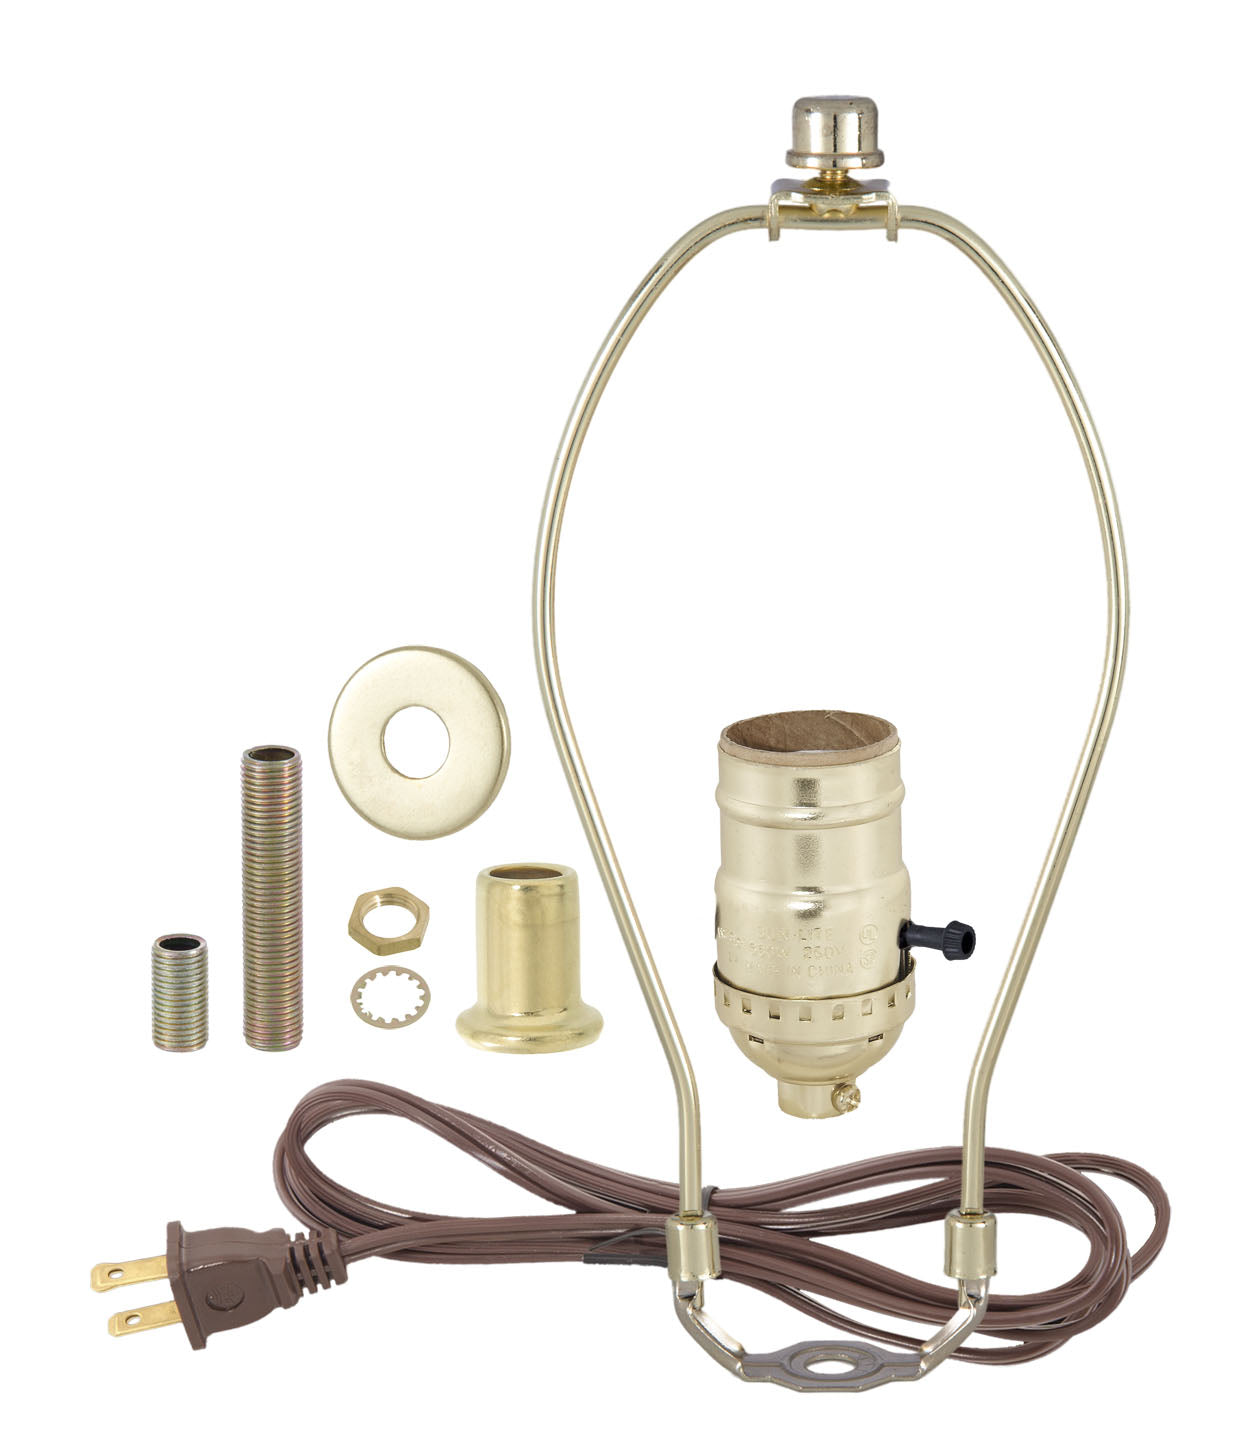 Brass Table Lamp Wiring Kit with 3-way Socket